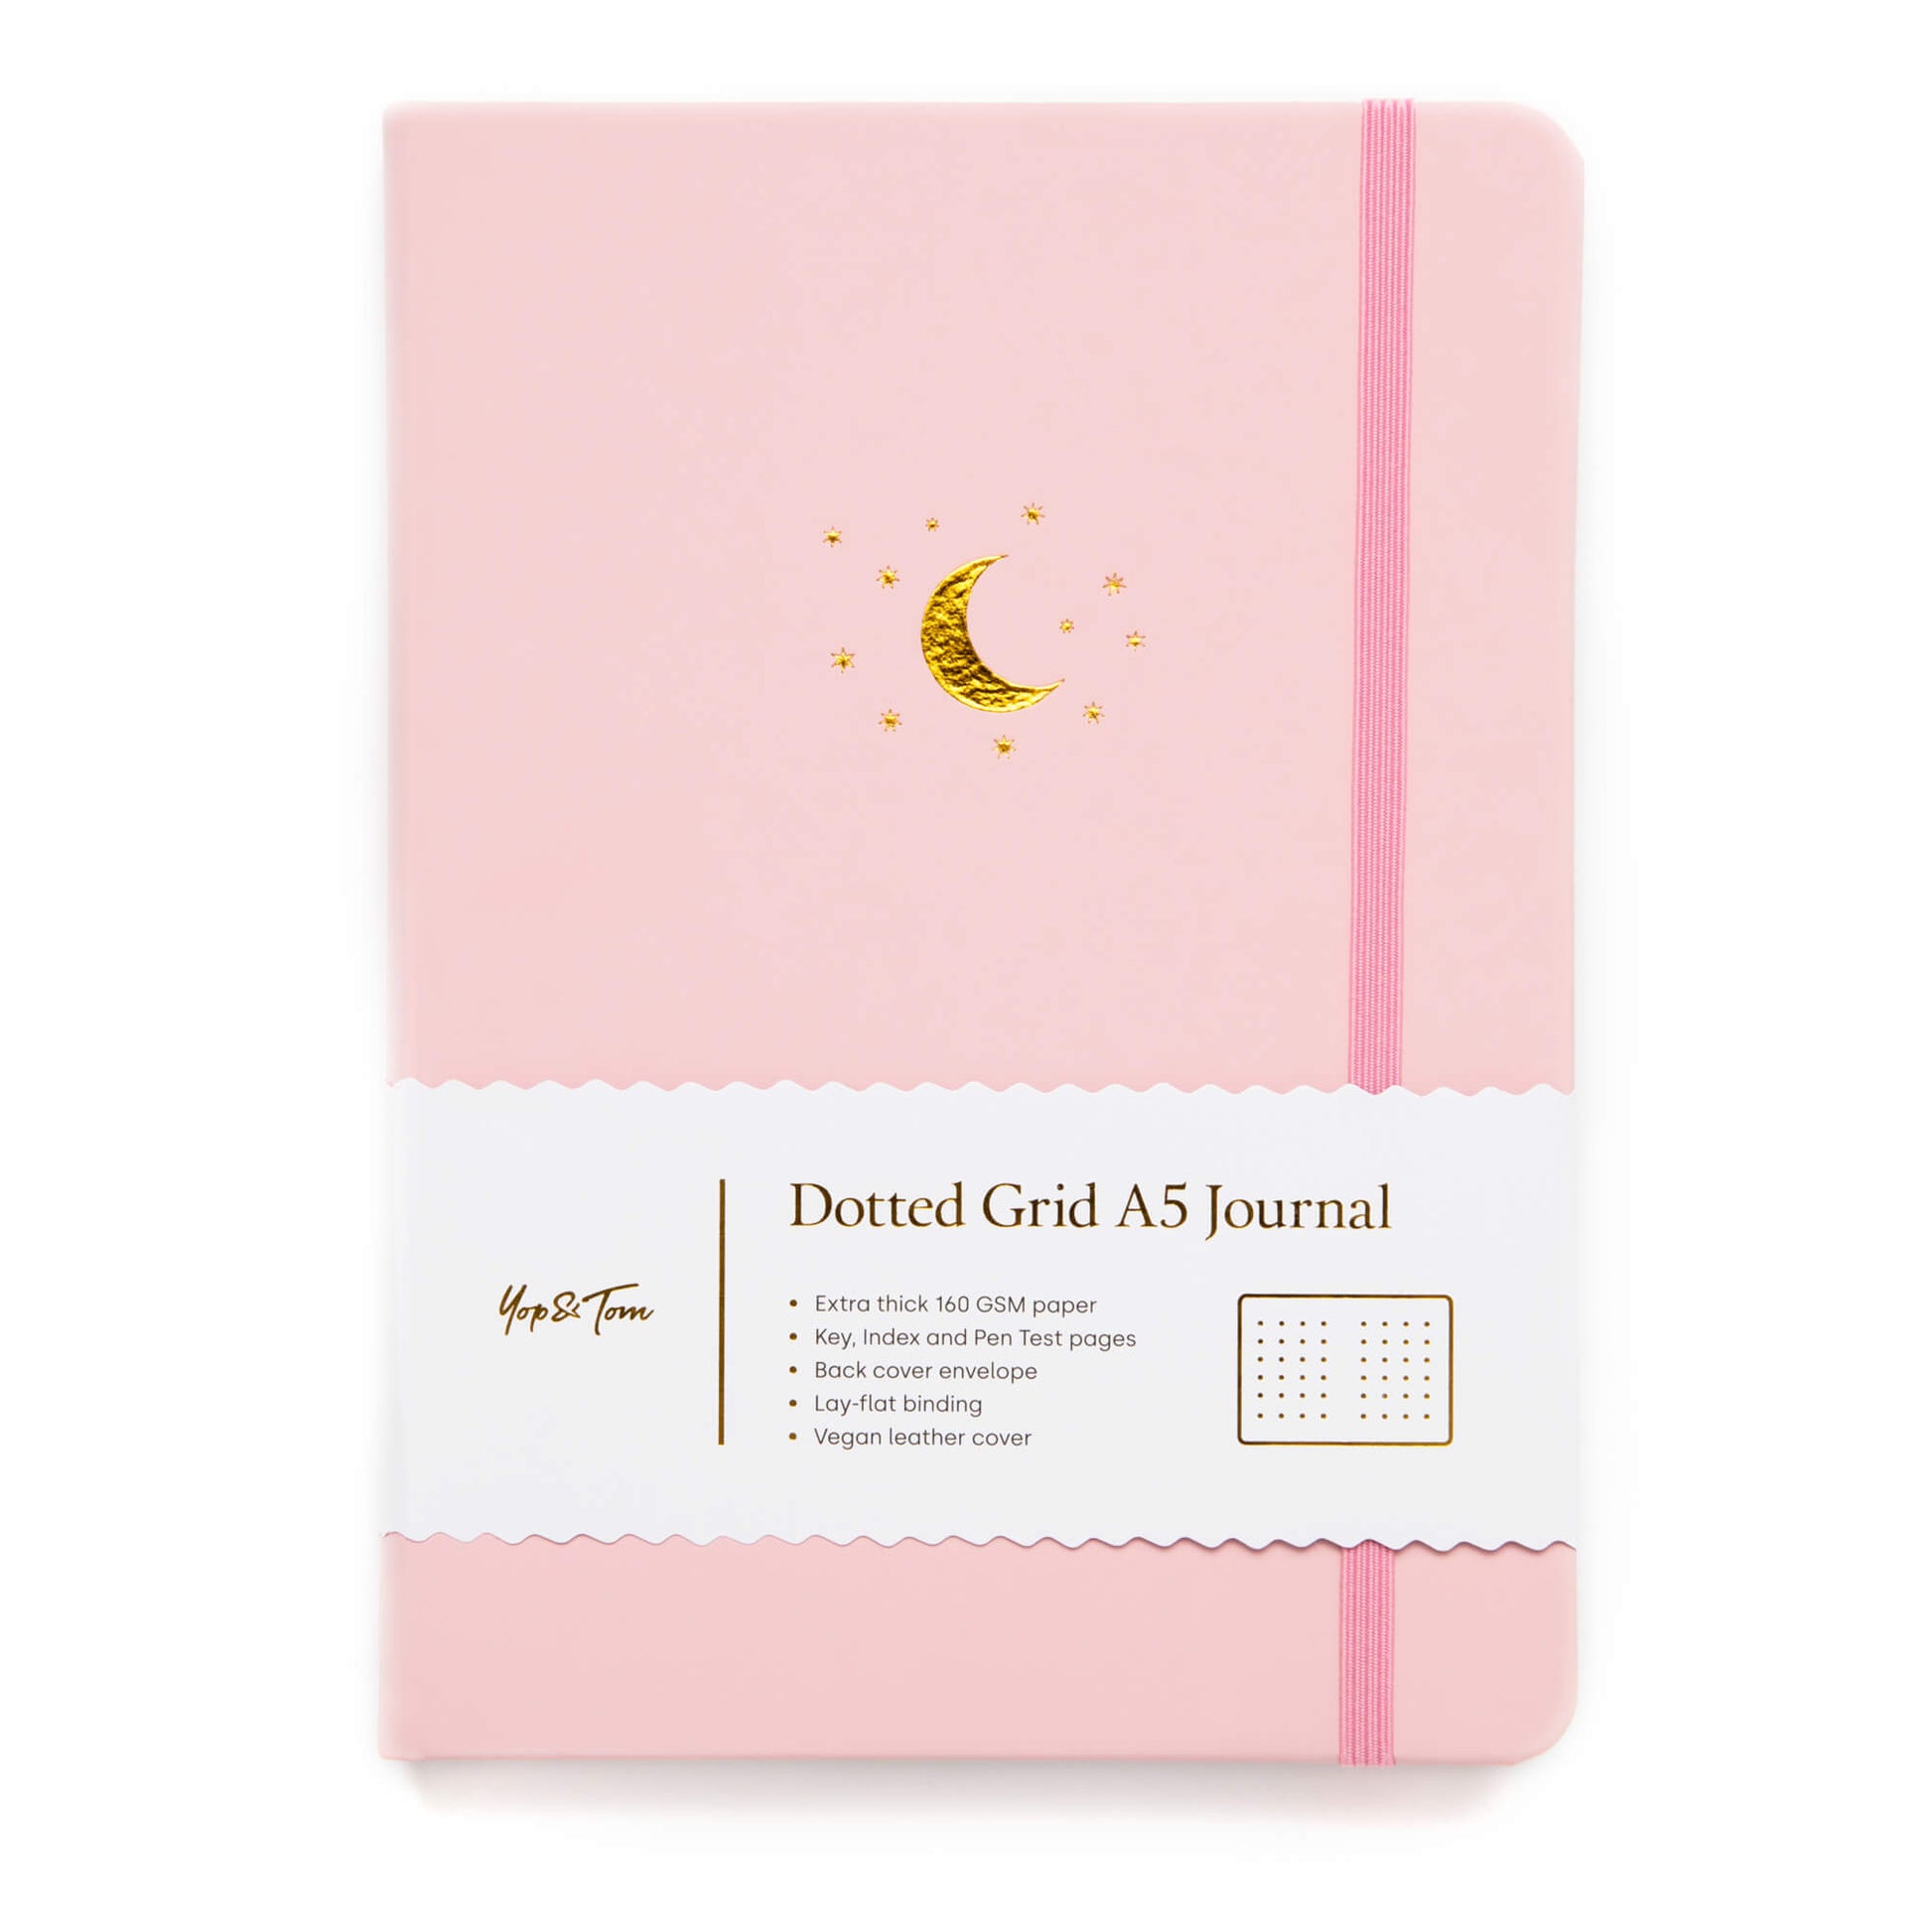 Dotted Journal (Rose Gold) – Pulse